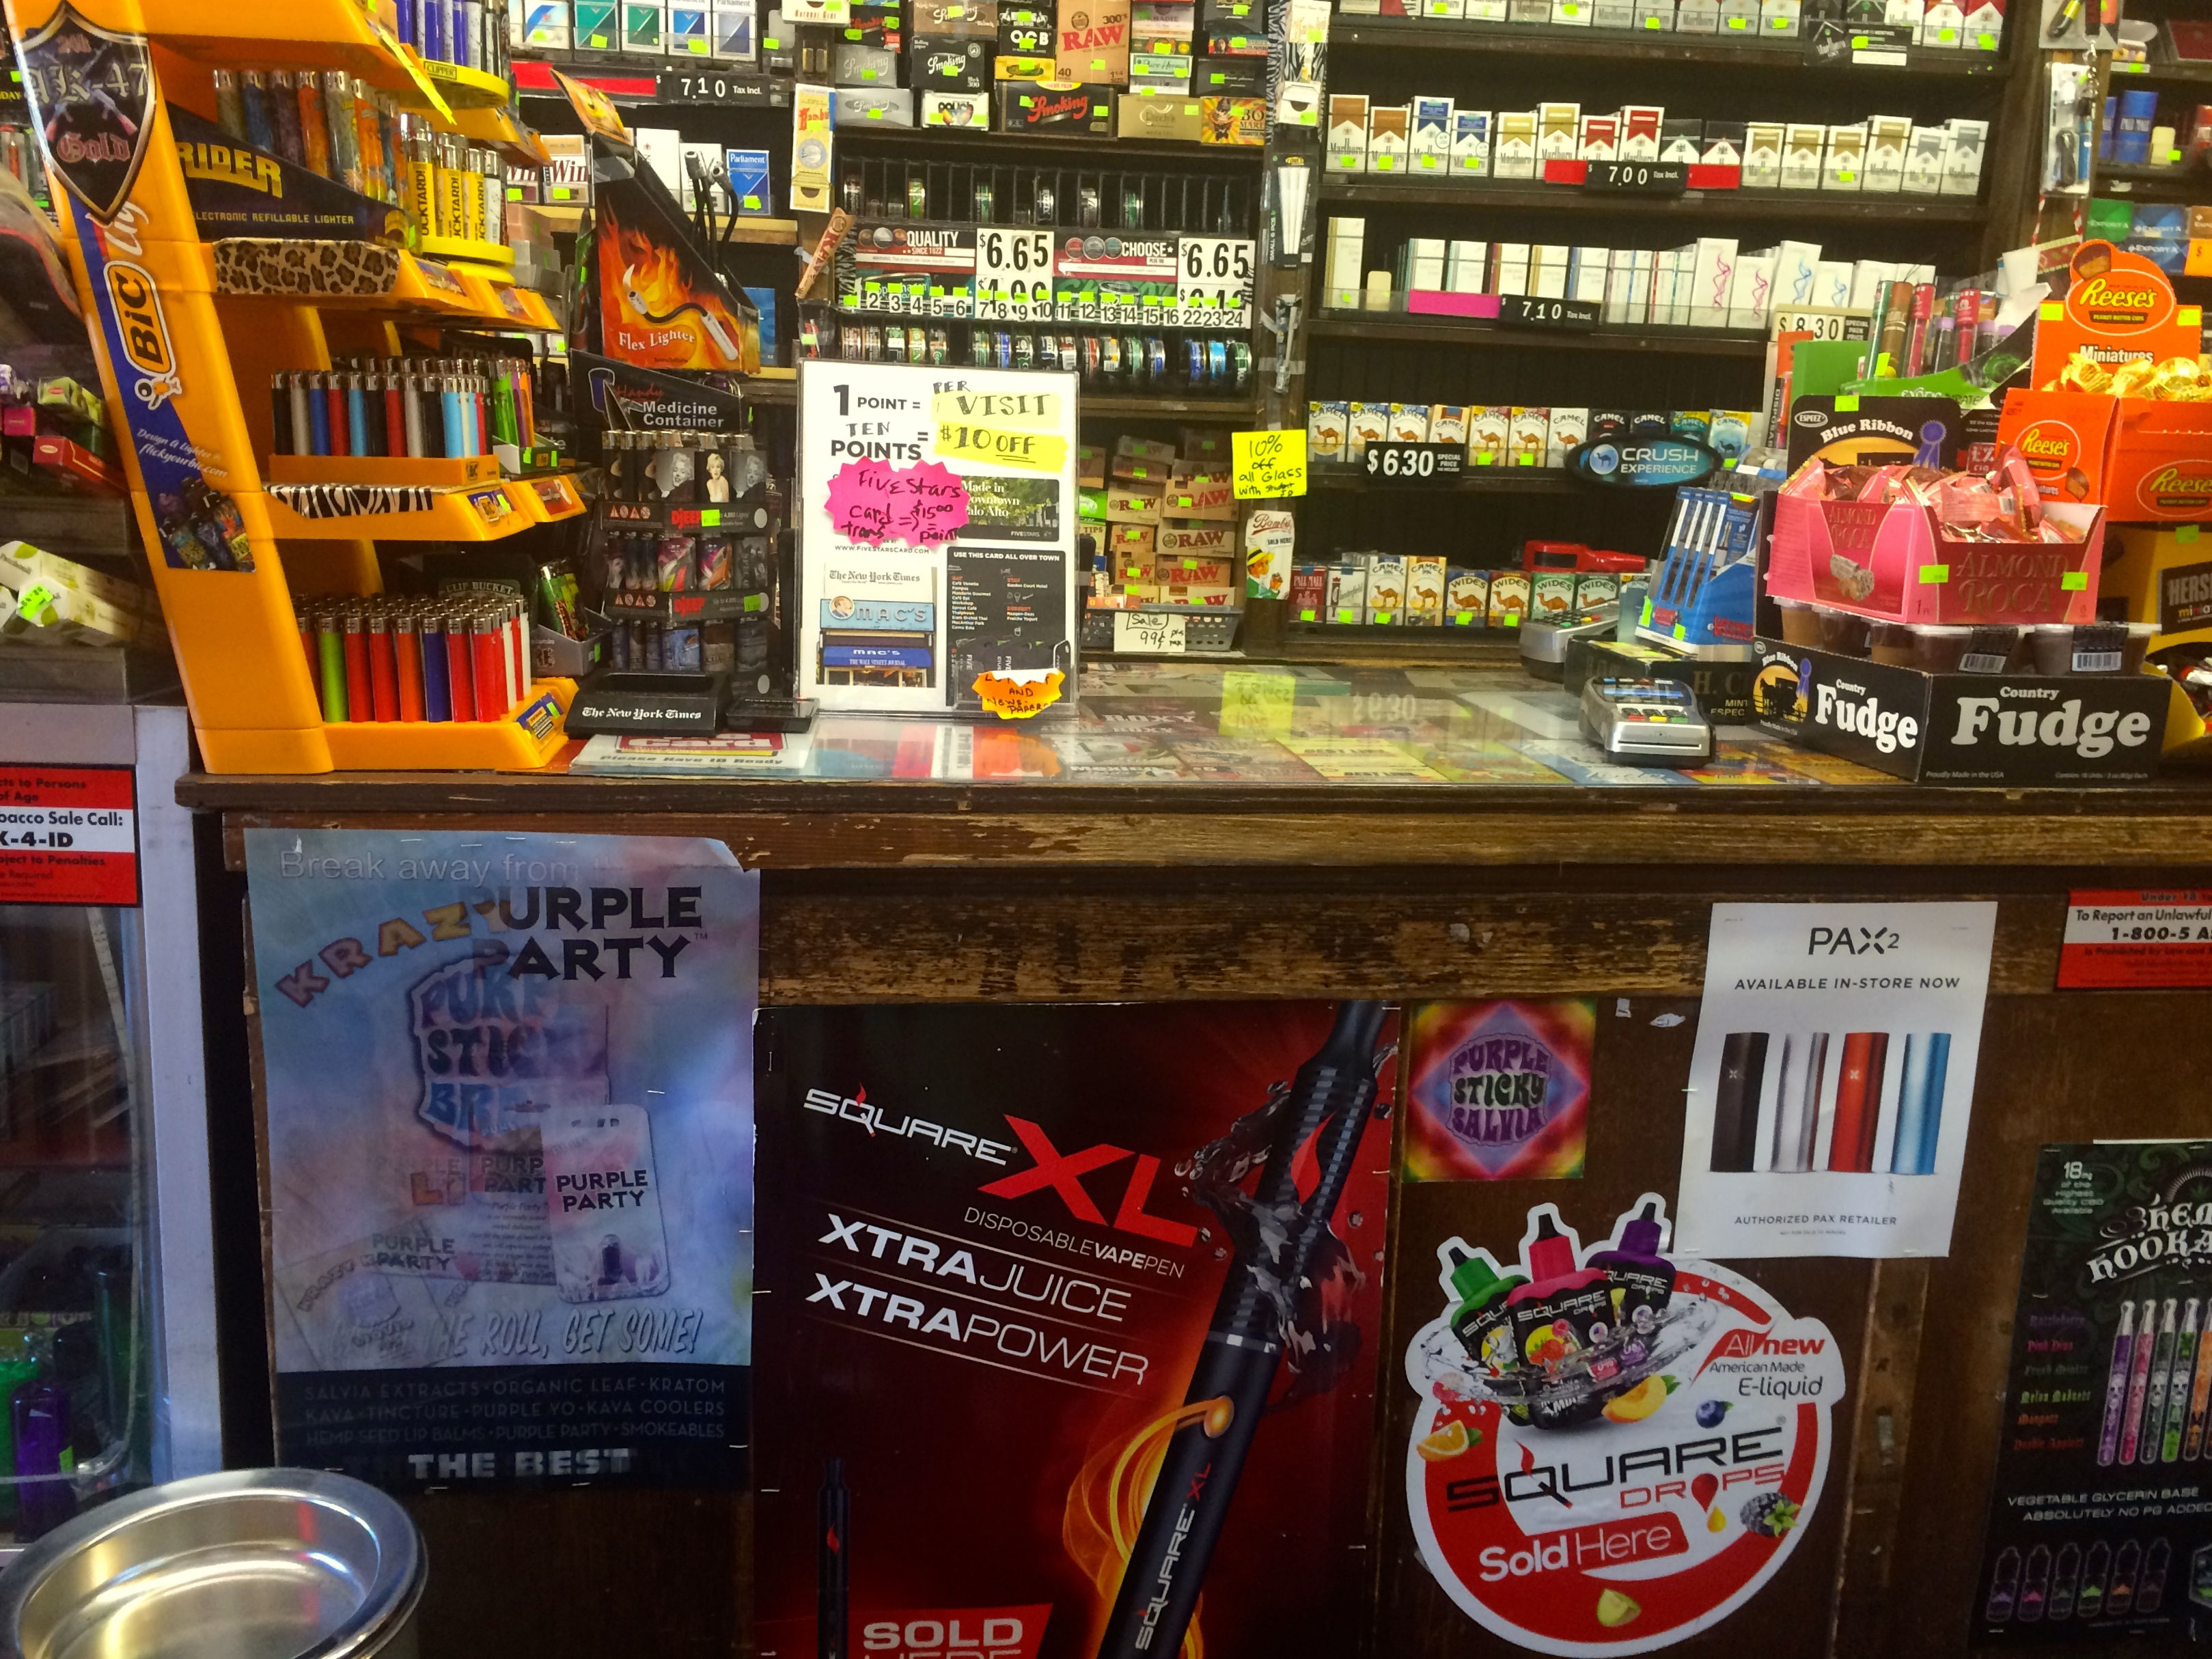 Display of Retail Counter of Tobacco Products